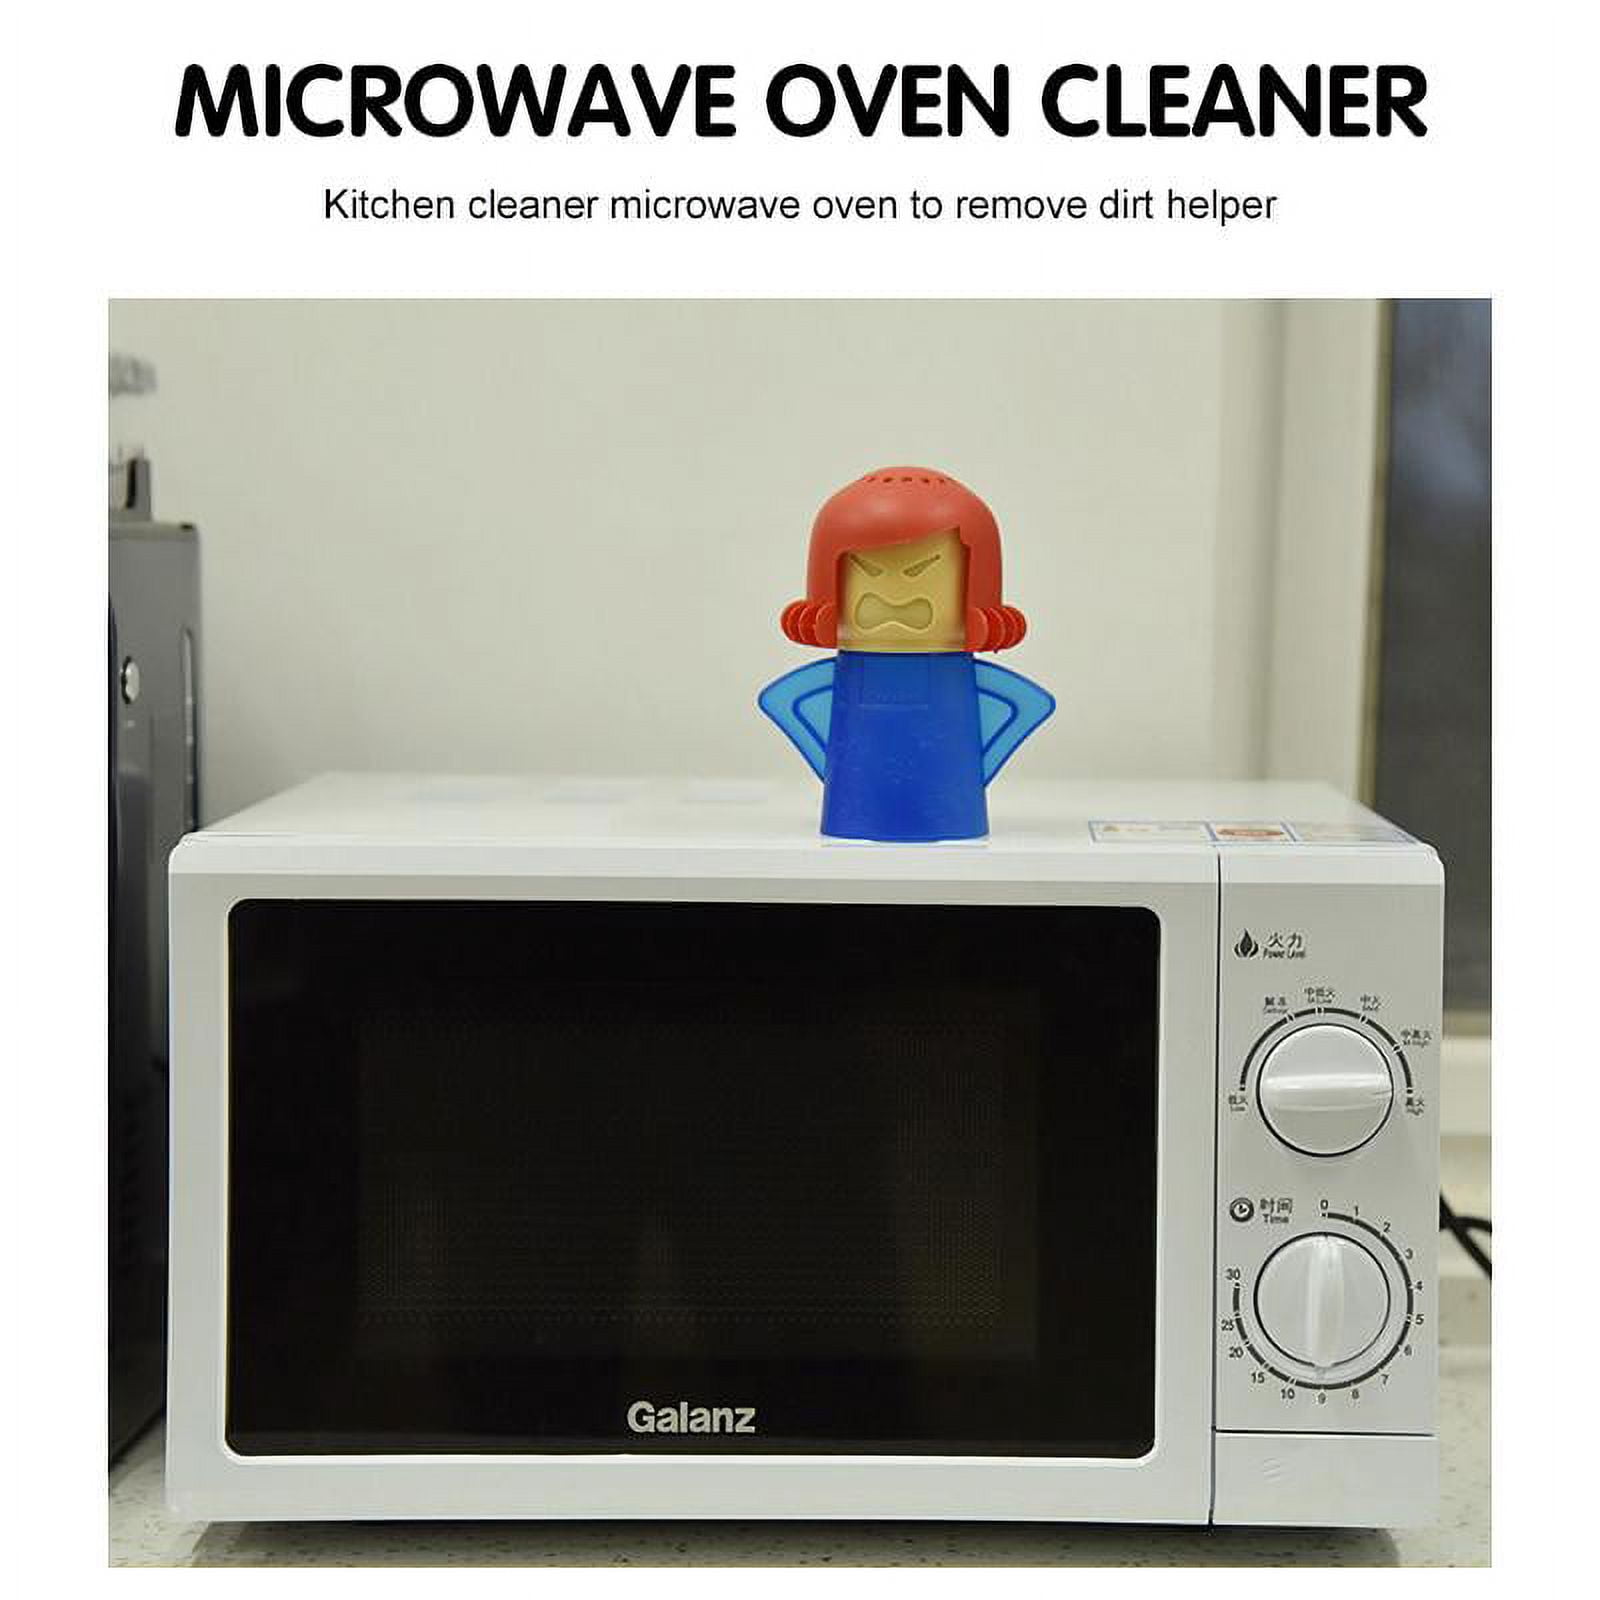 Steaming Mad Mom Microwave Cleaner – The Lace Door